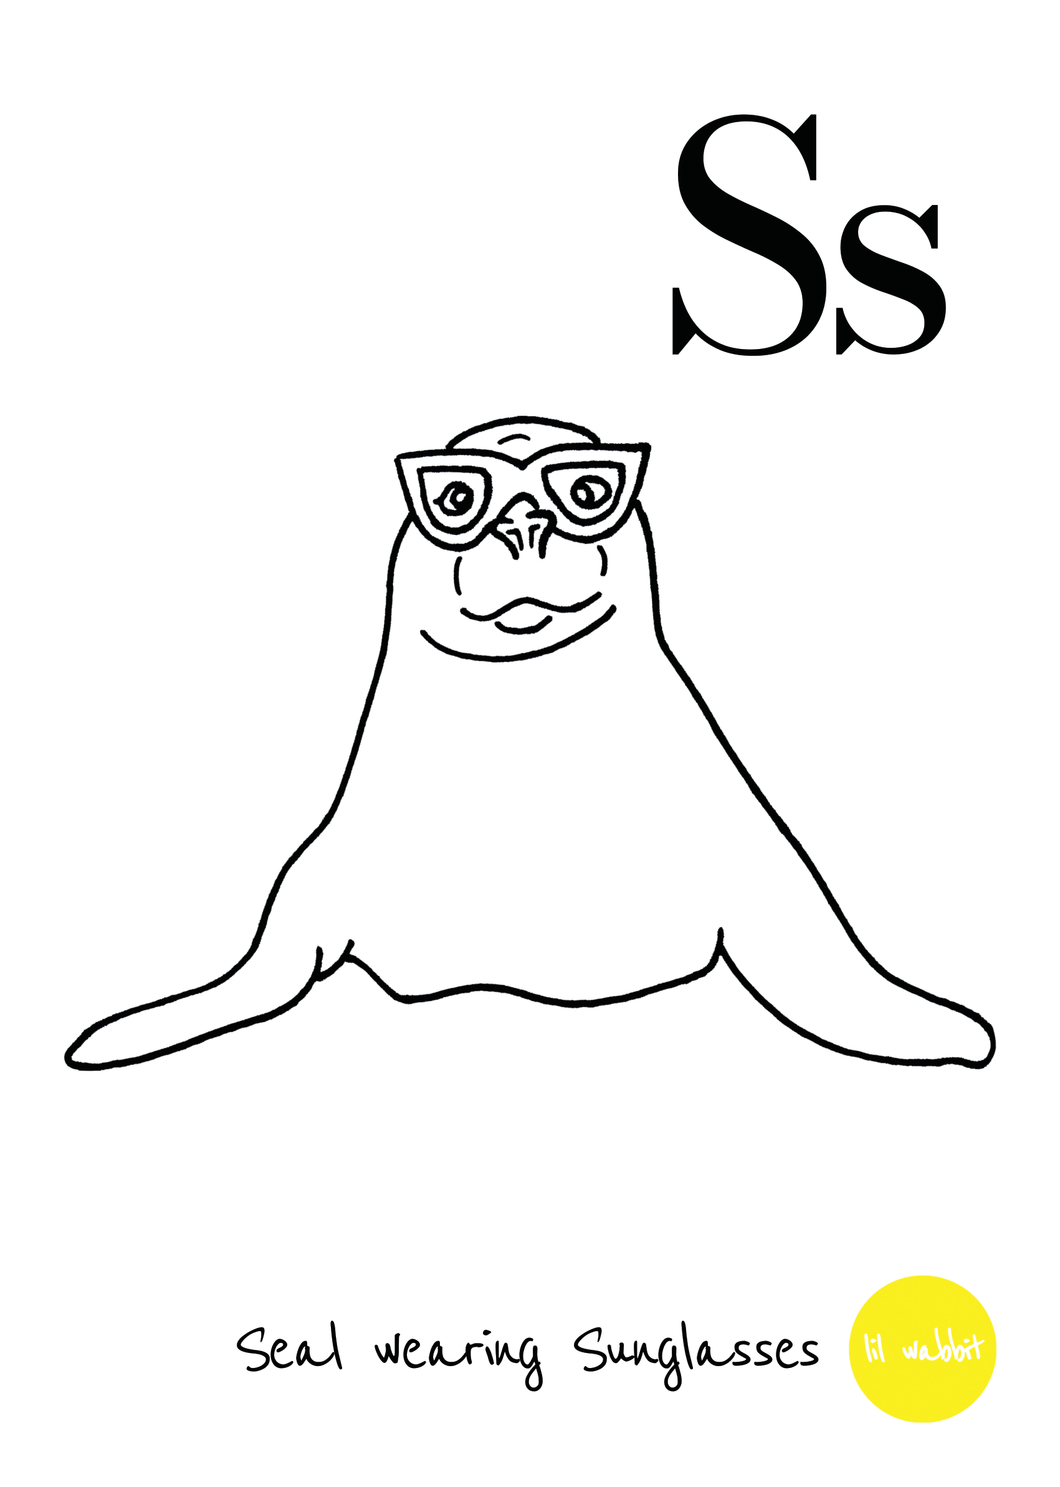 A black animal outline ready to colour in of a seal wearing sunglasses